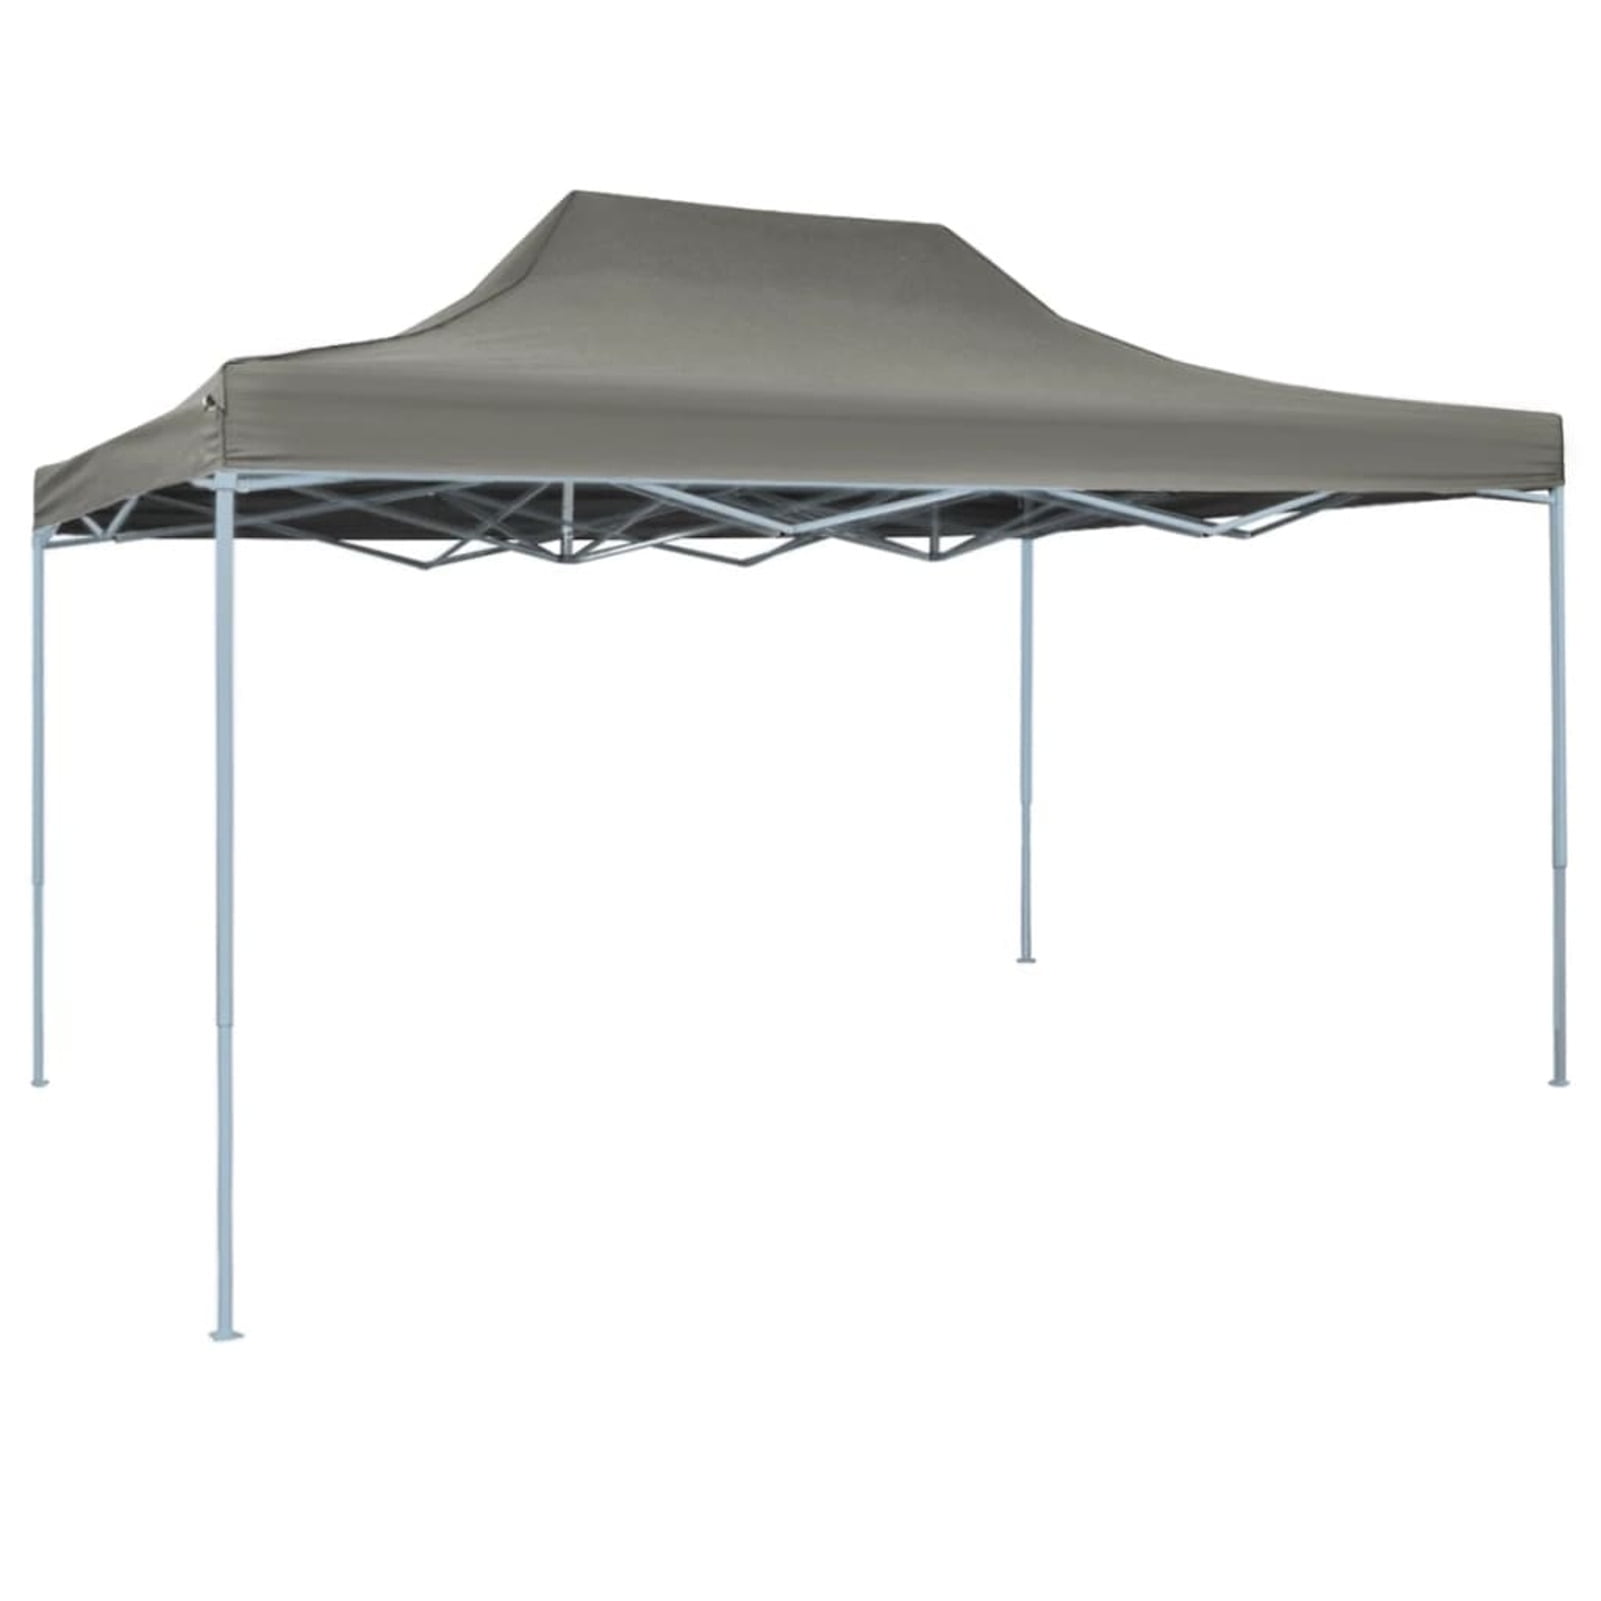 Professional Folding Party 118.1"x157.5" Steel Anthracite - Walmart.com